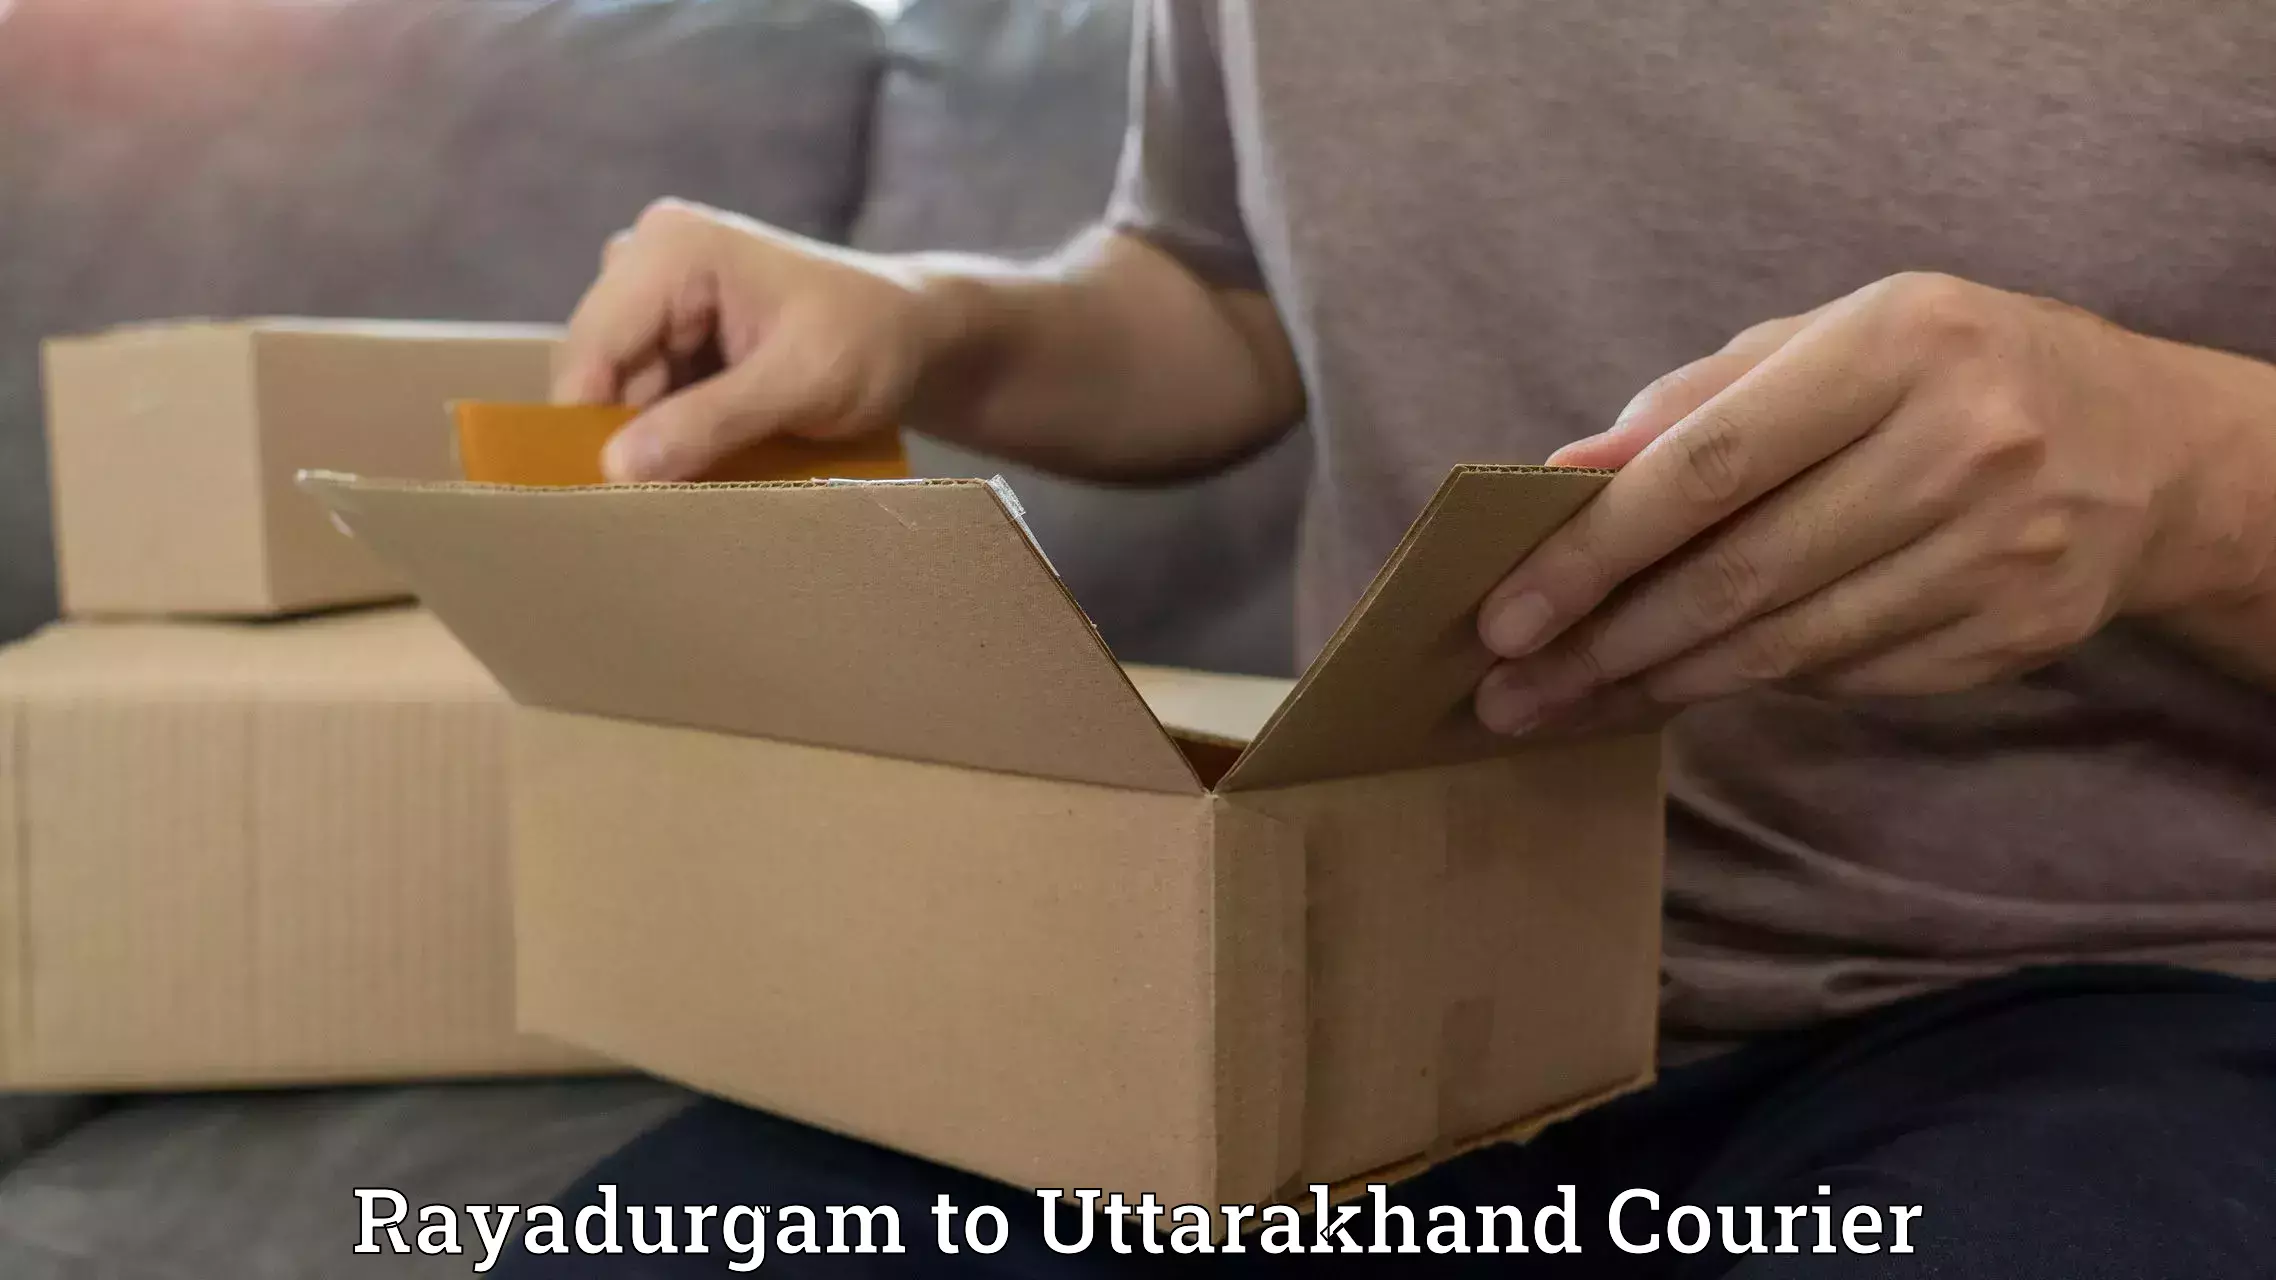 State-of-the-art courier technology Rayadurgam to Rudrapur